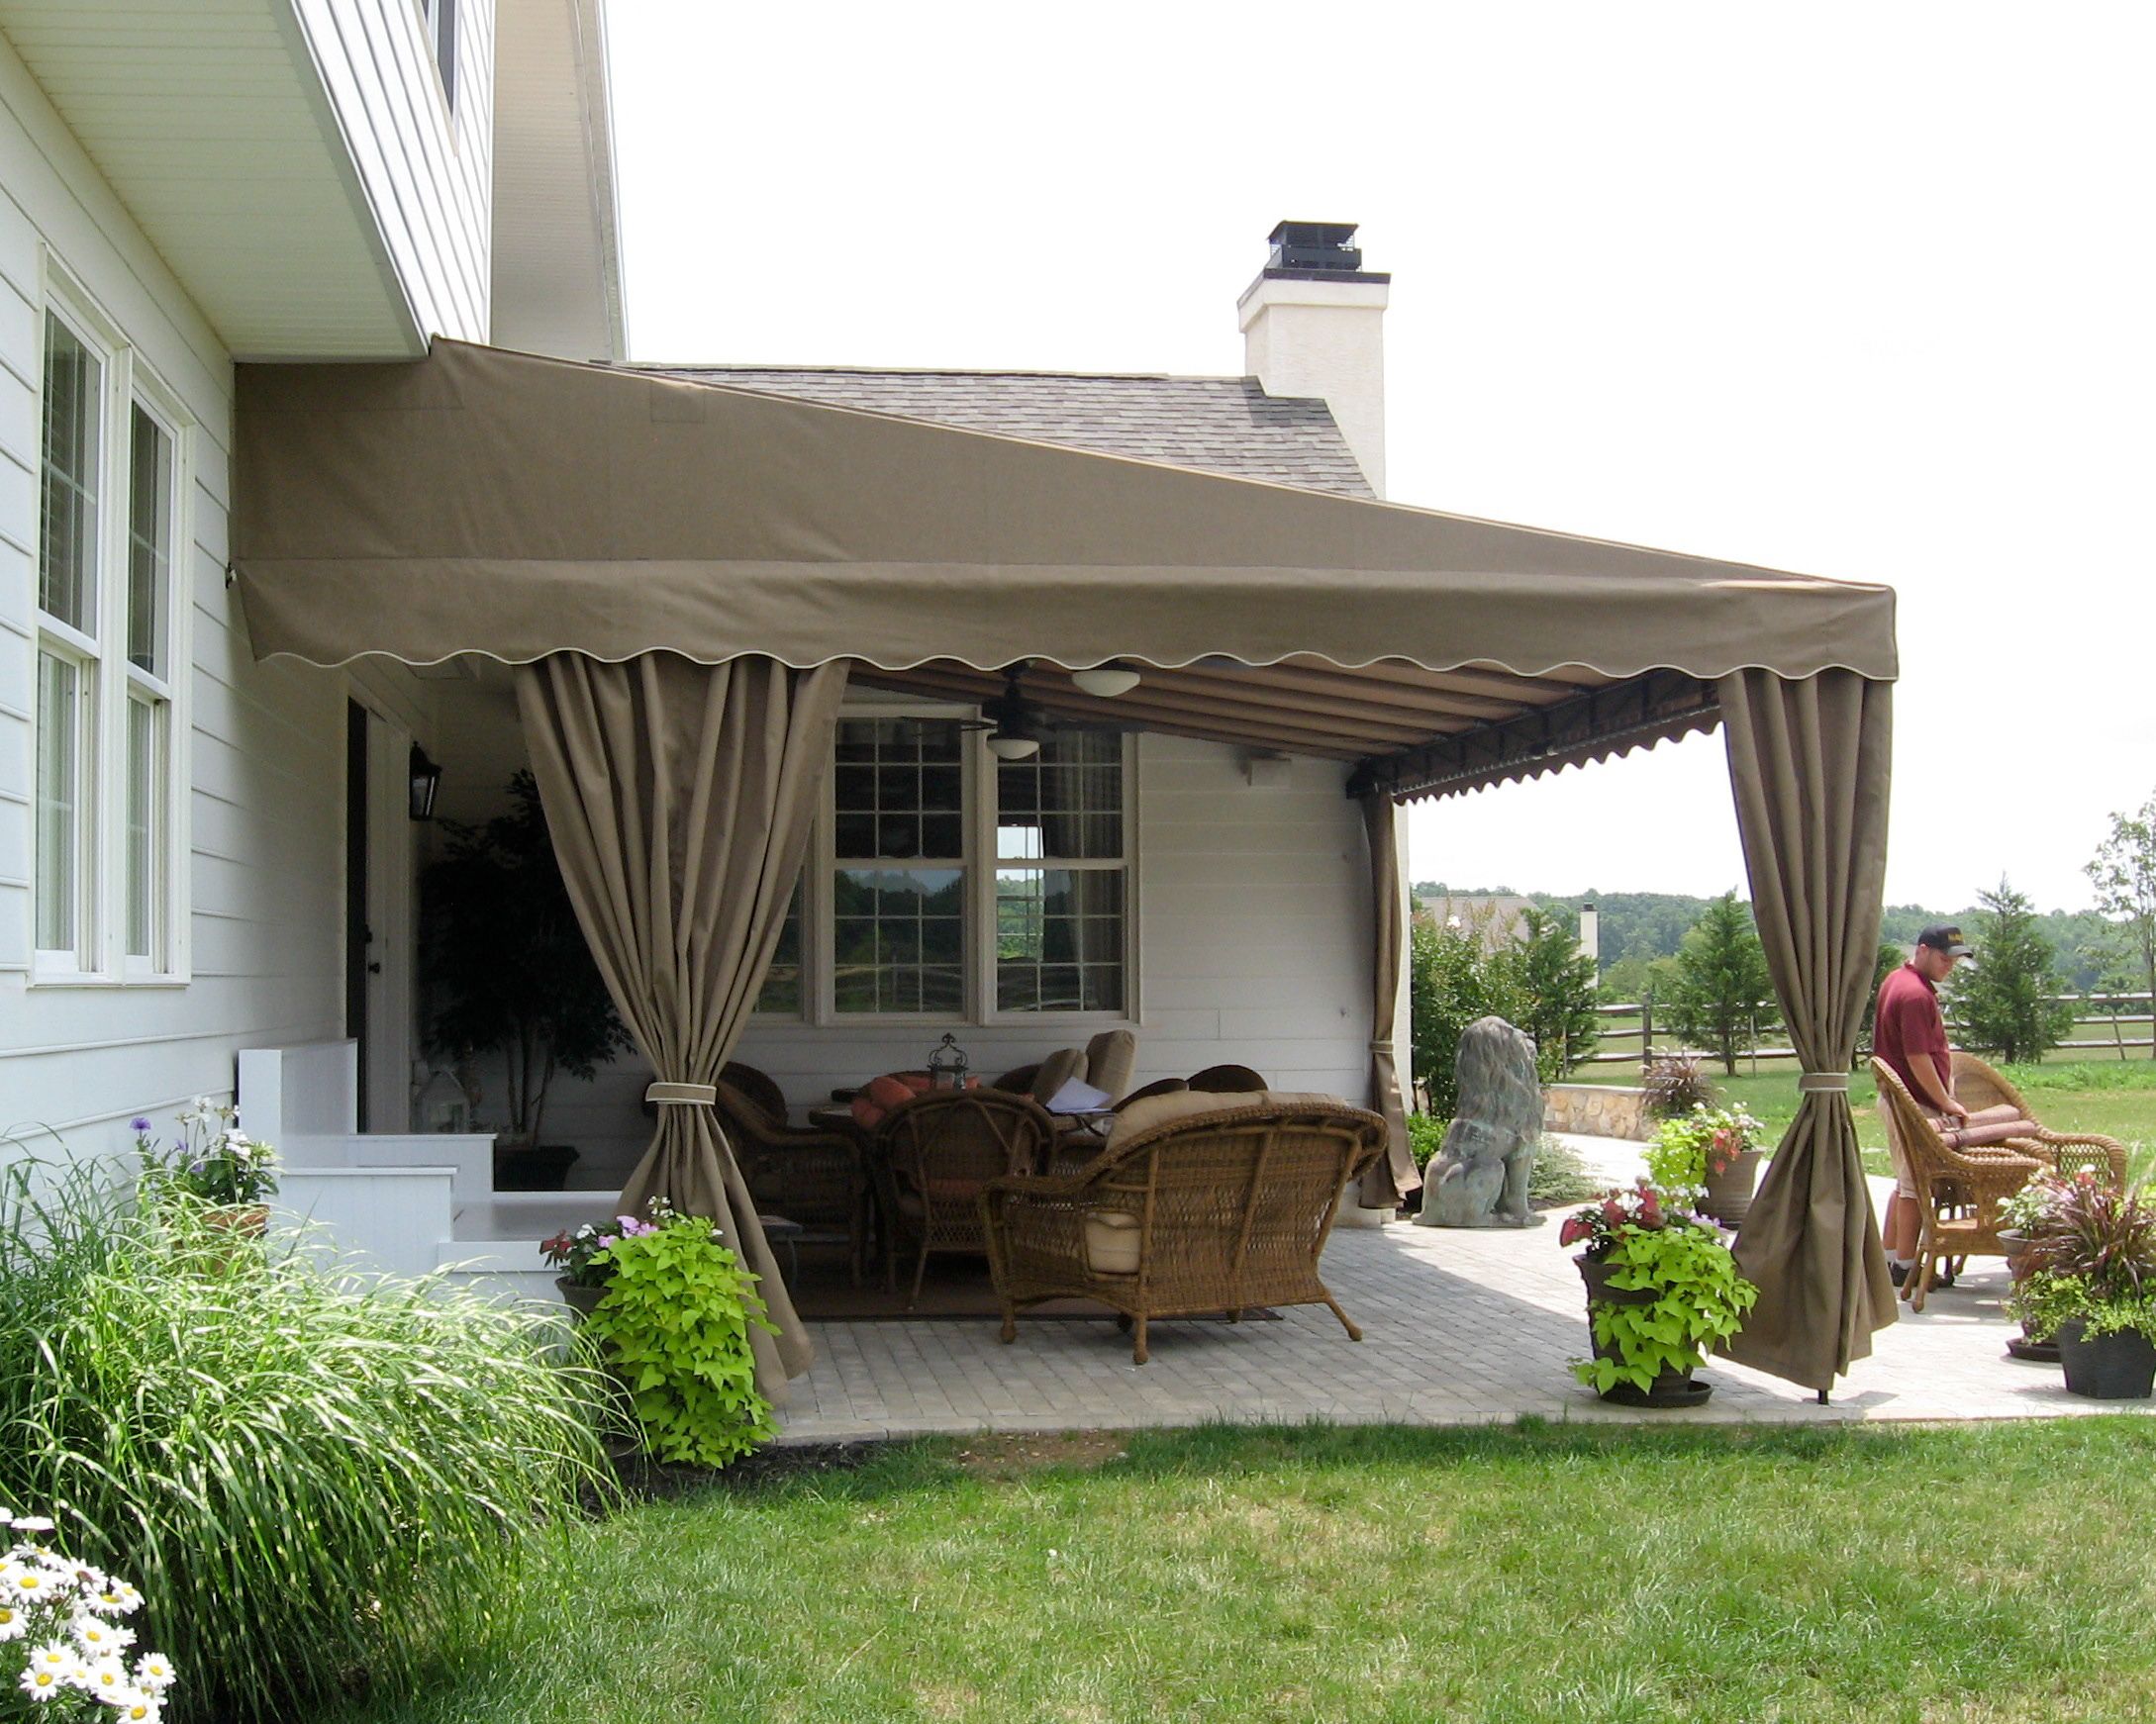 All The Things You Need To Know To Take Care Of Your Curtains And Awnings